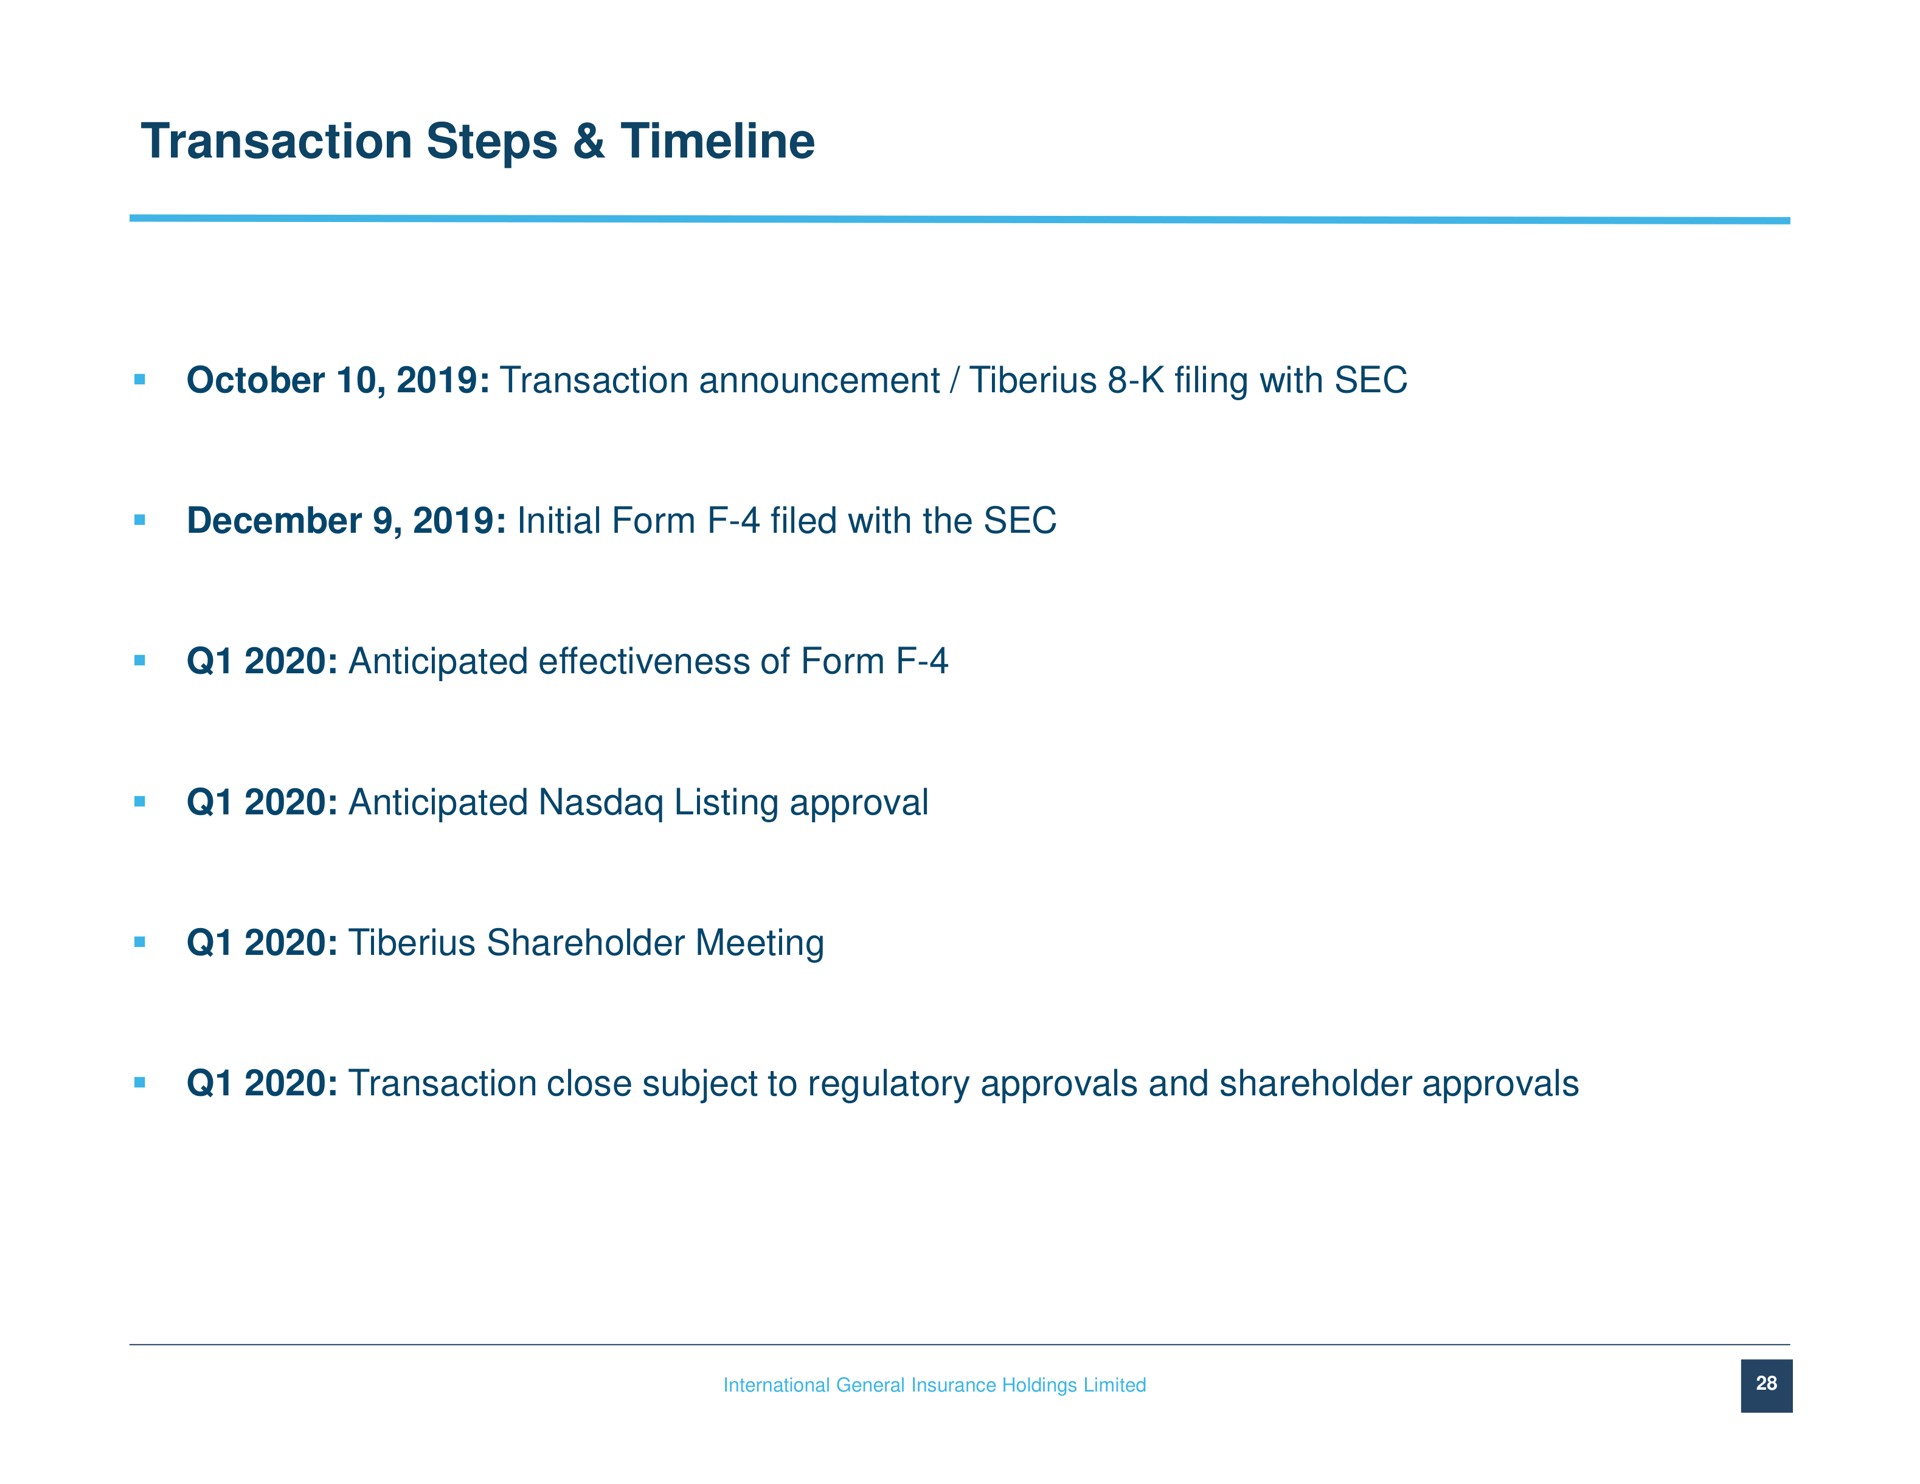 transaction steps transaction announcement filing with sec initial form filed with the sec anticipated effectiveness of form anticipated listing approval shareholder meeting transaction close subject to regulatory approvals and shareholder approvals | IGI